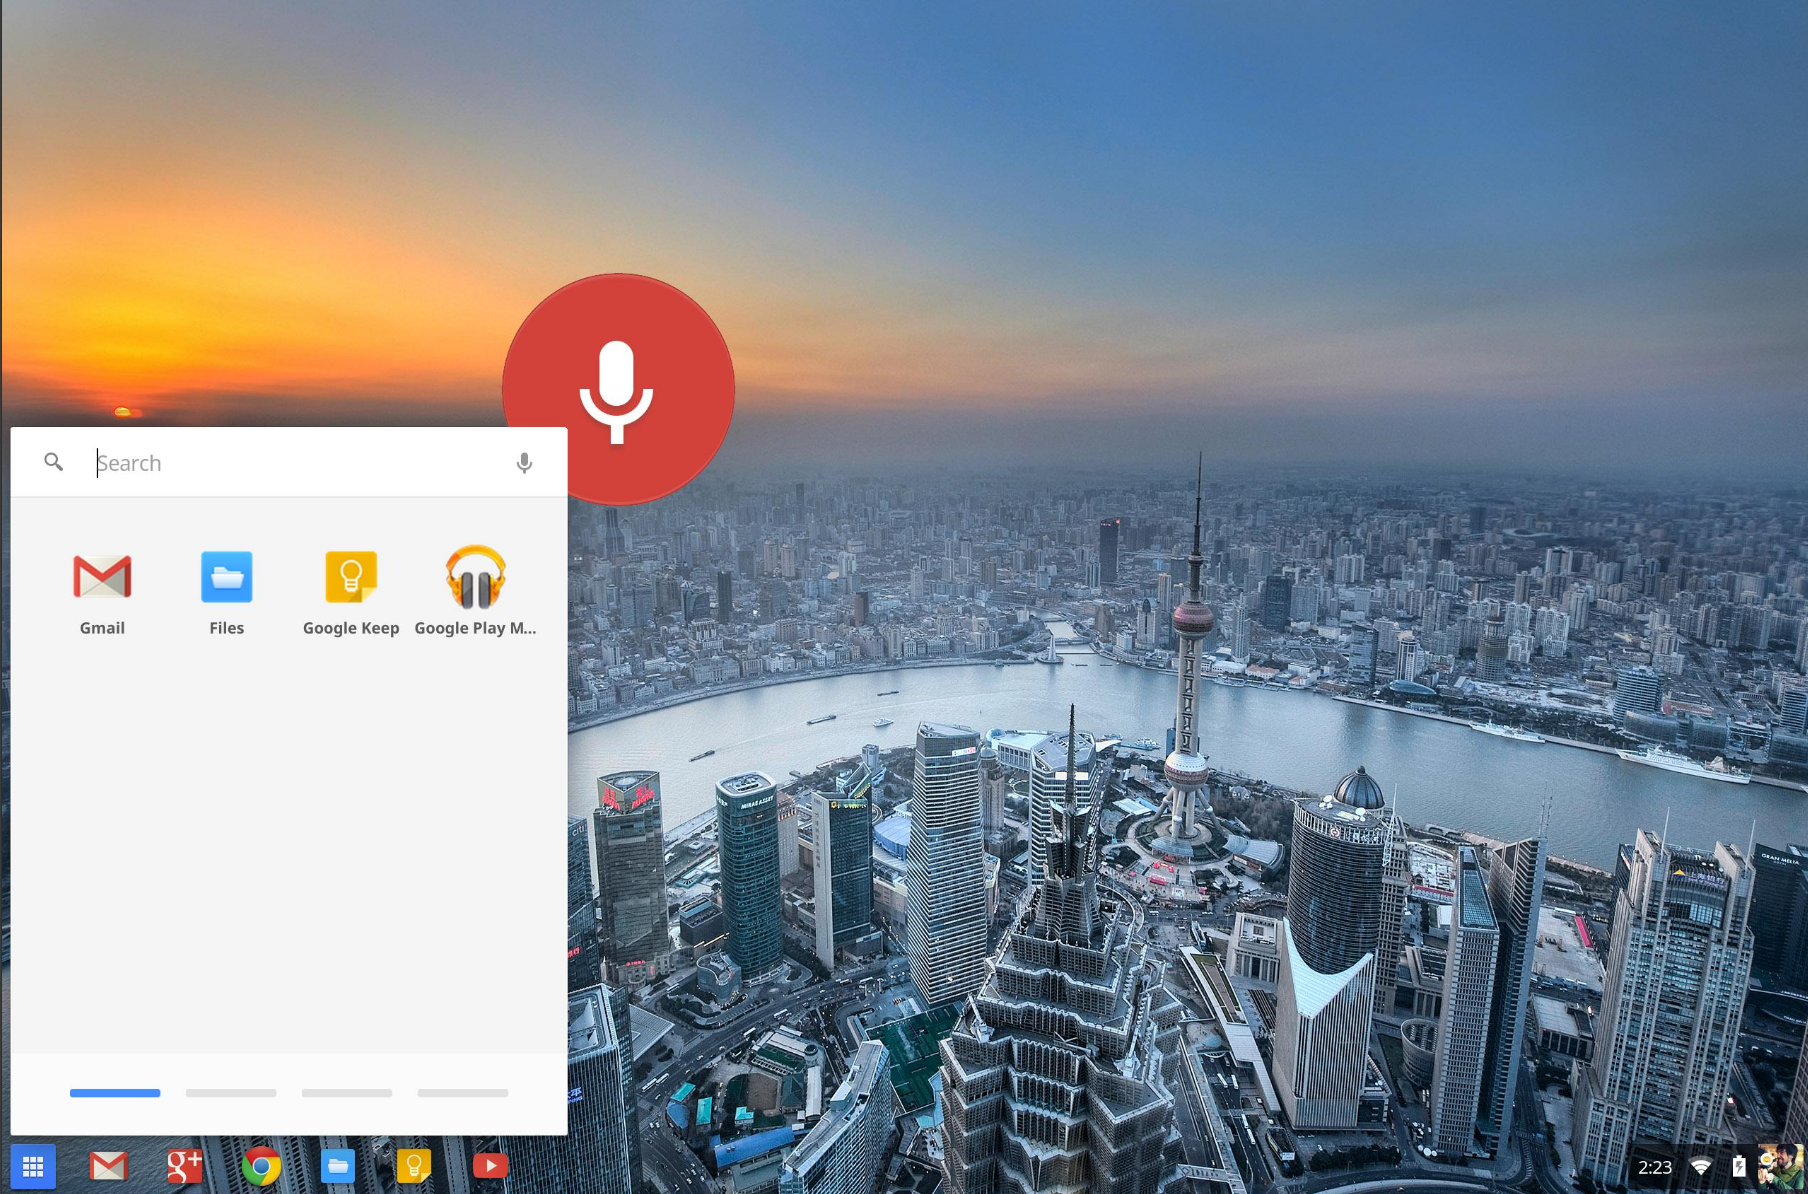 Always-On Google Voice Search Is Coming To Chromebooks